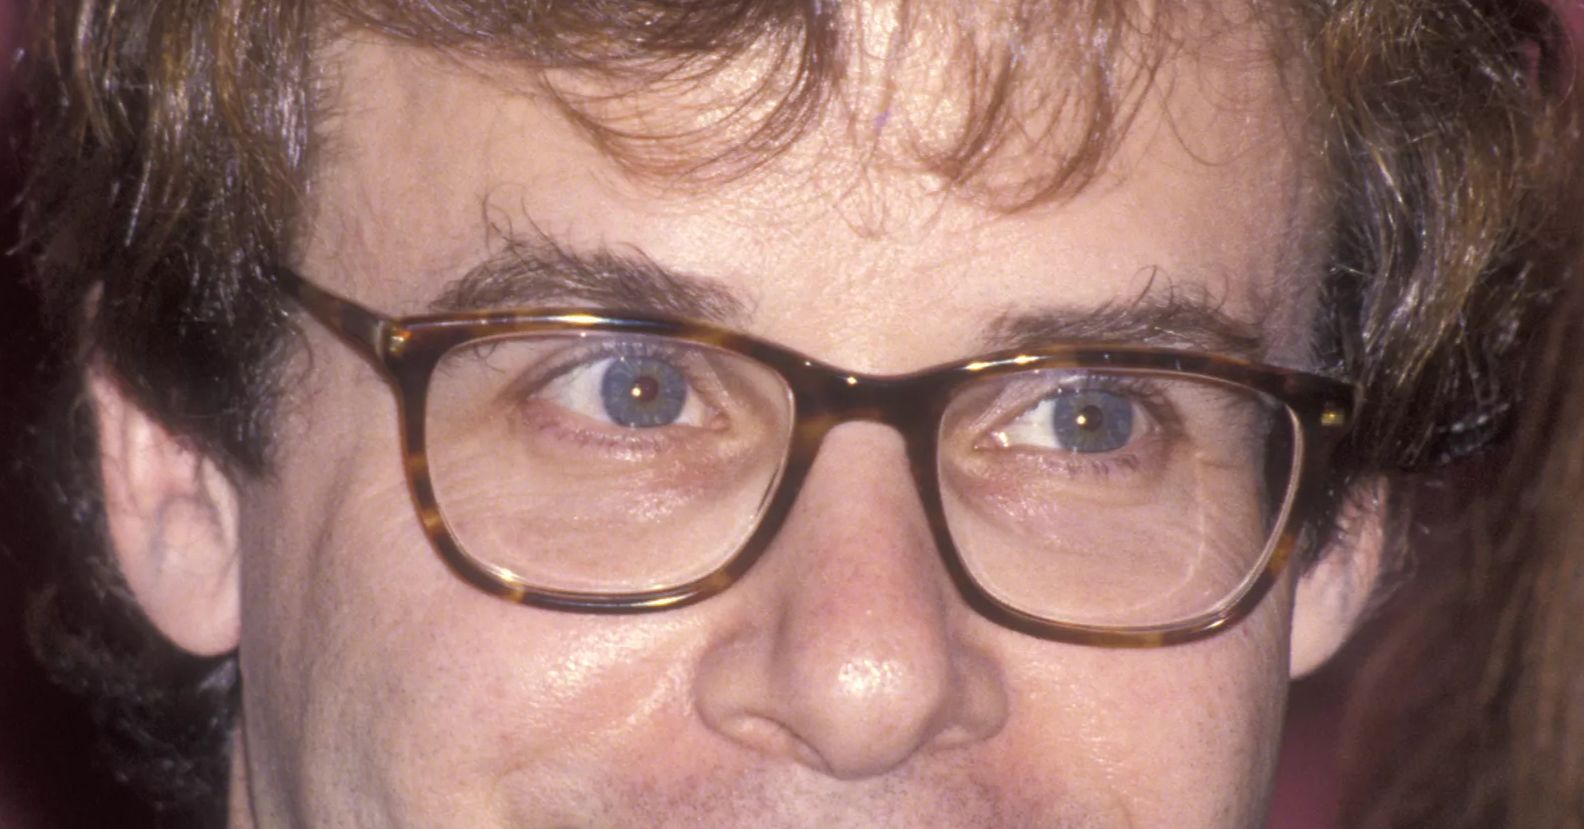 Rick Moranis Offically Signed on To Star In 'Honey I Shrunk The Kids' Reboot5 日前